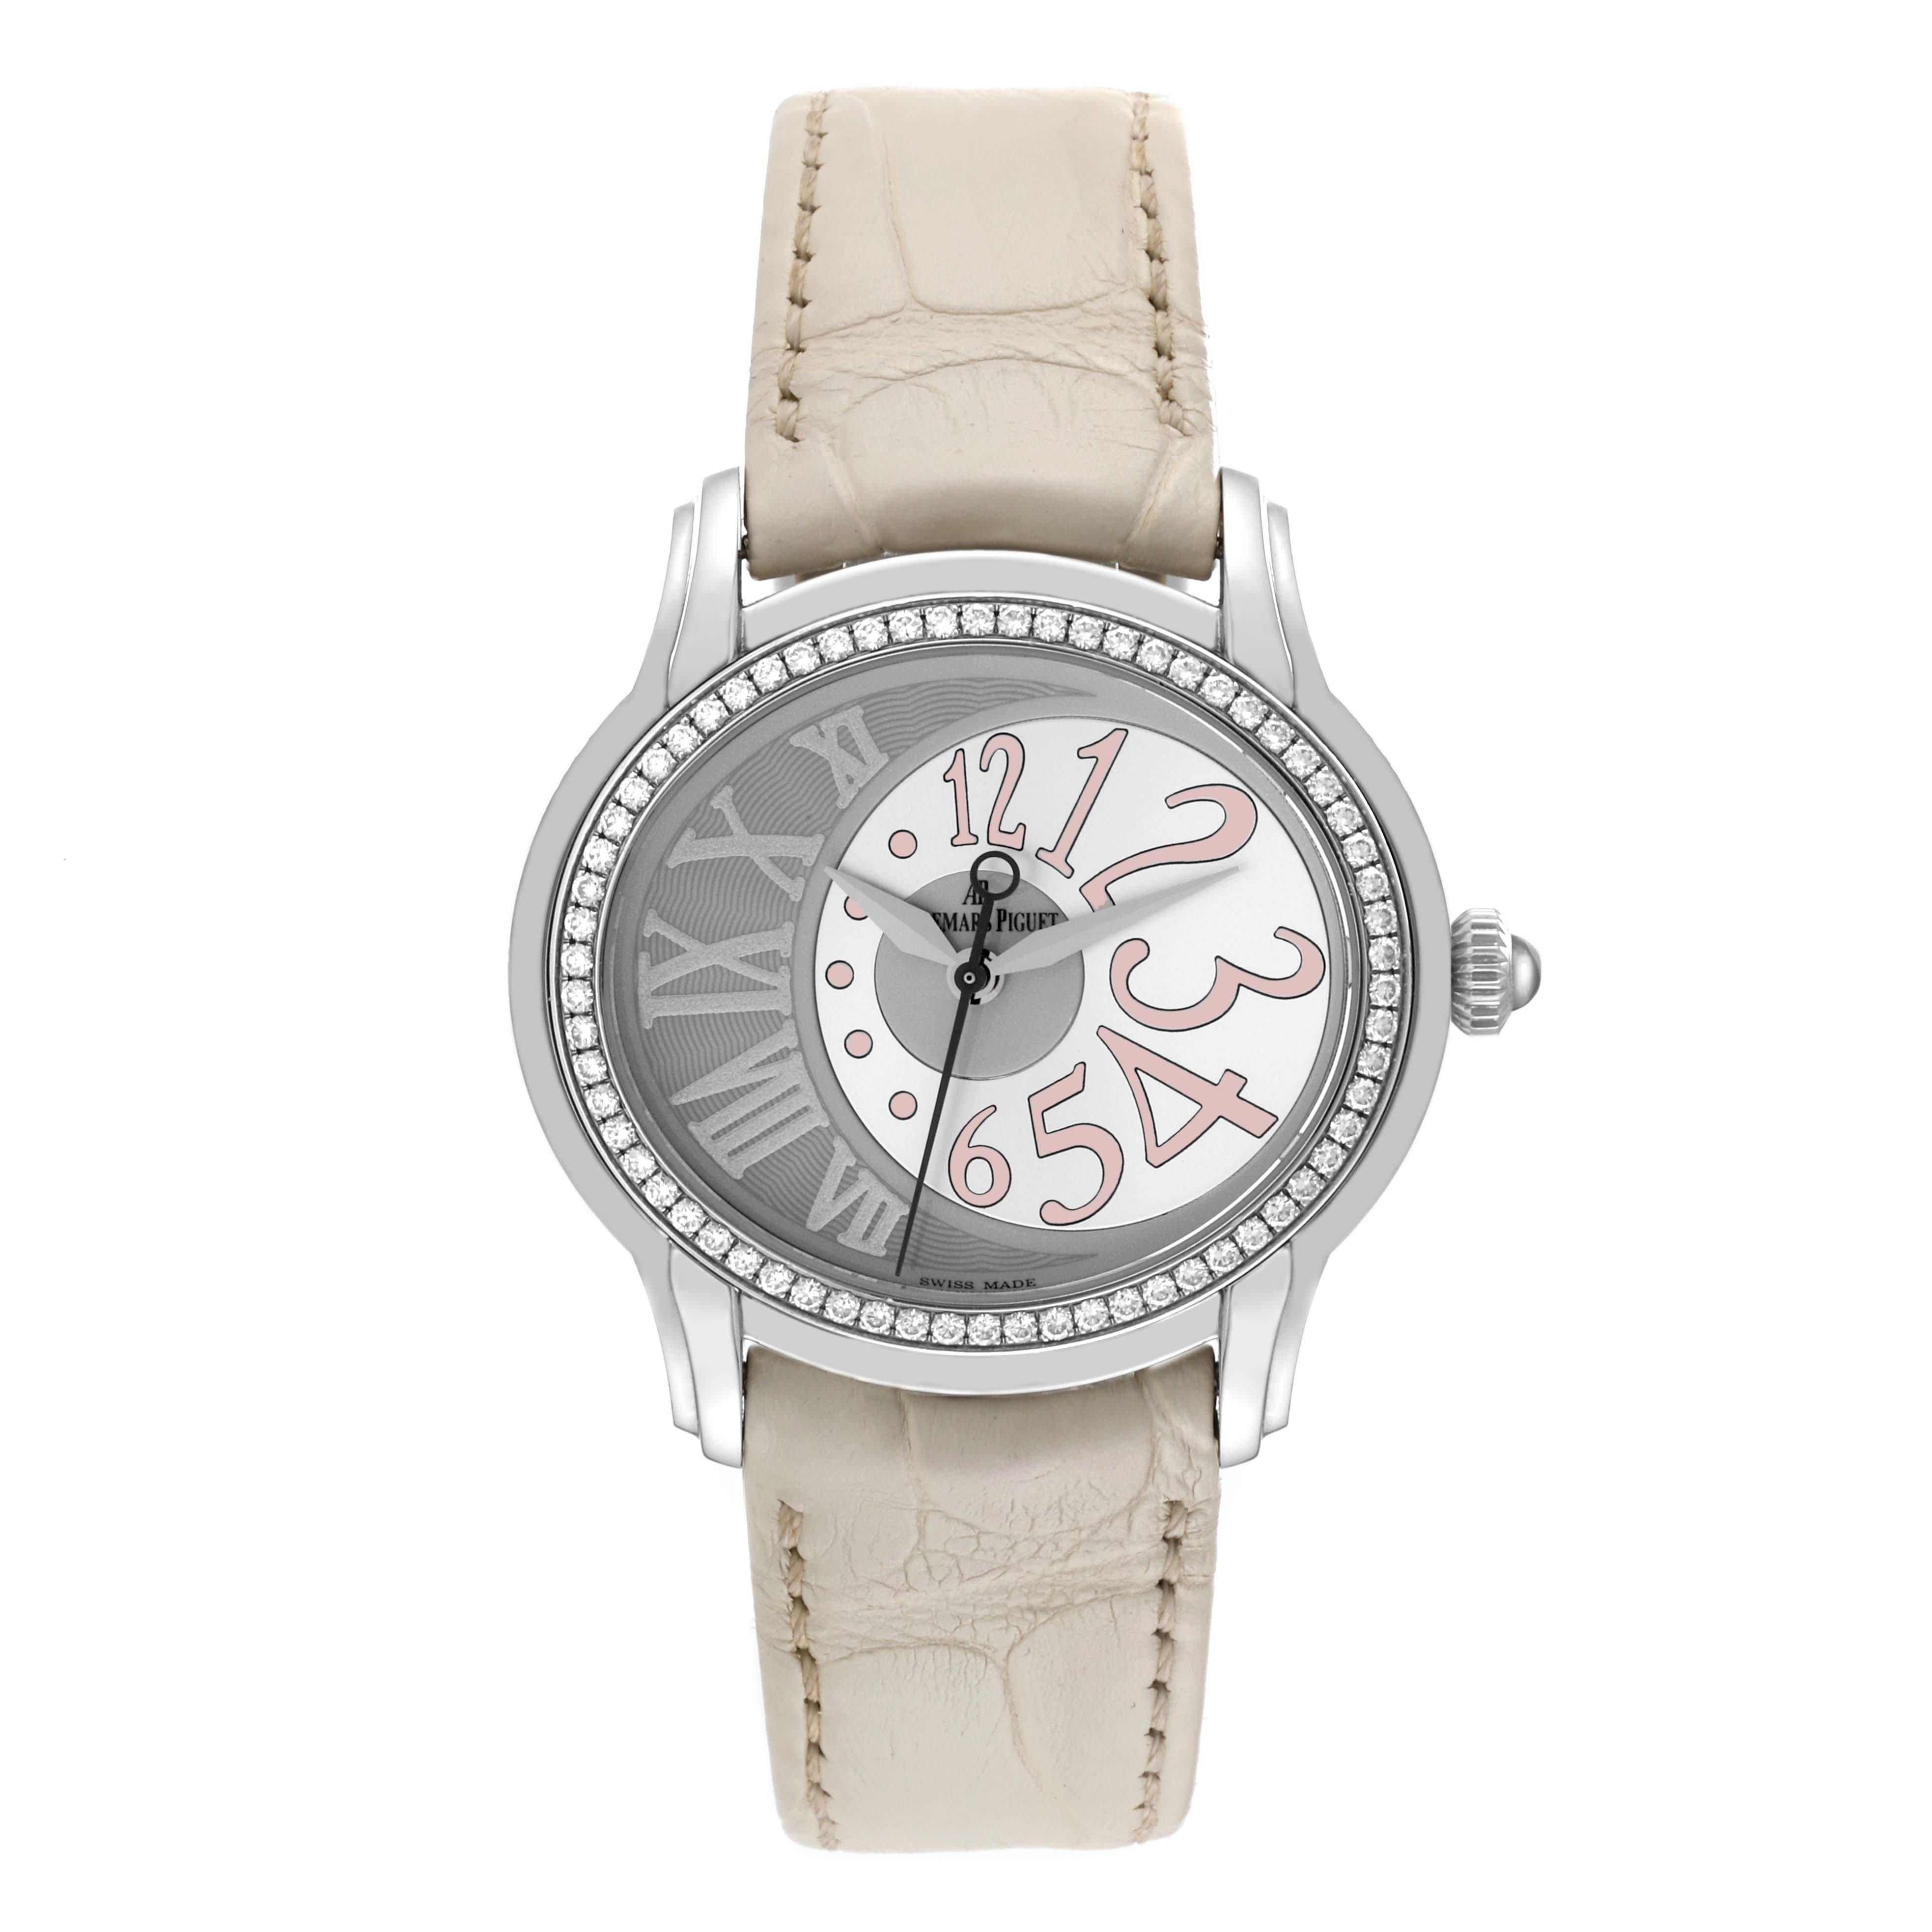 Audemars Piguet Millenary Steel Diamond Ladies Watch 77301ST. Automatic self-winding movement. Stainless steel oval case 39.5mm X 35.5mm. Case thickness 8.1 mm. The crown set with clear stone cabochon. Original Audemars Piguet diamond bezel set with